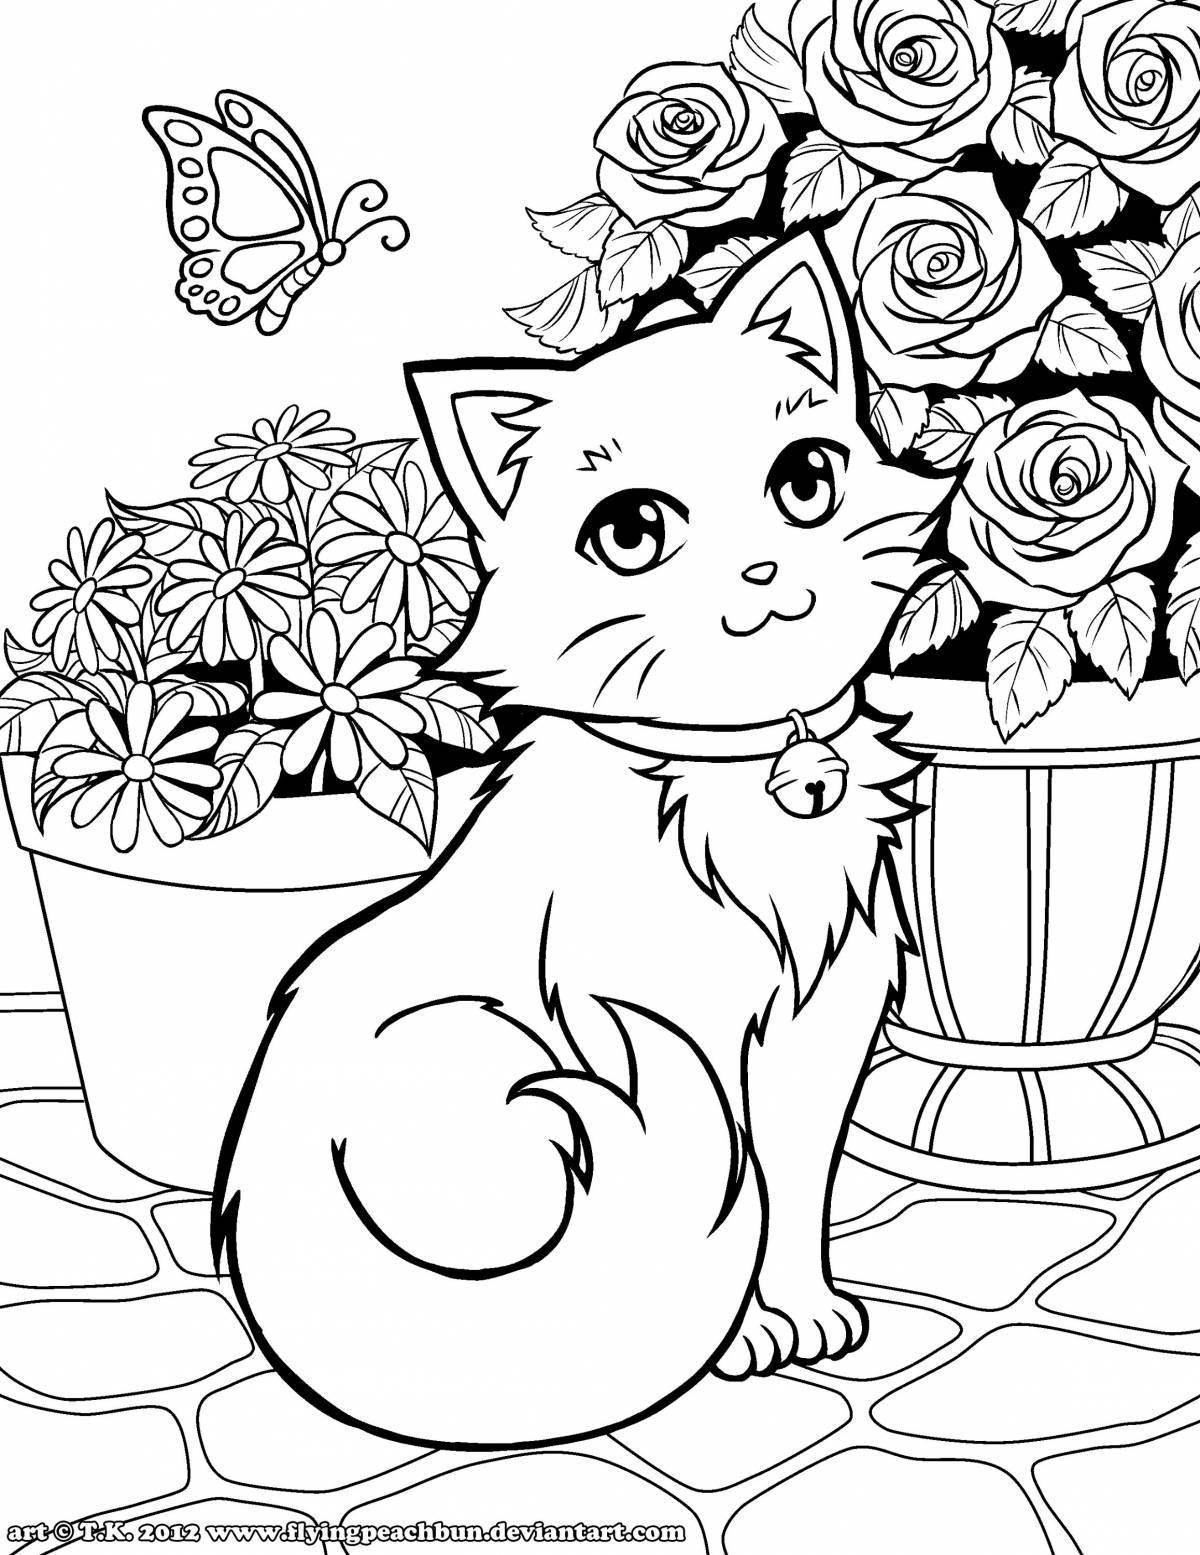 Fluffy coloring book for girls, cats and kittens